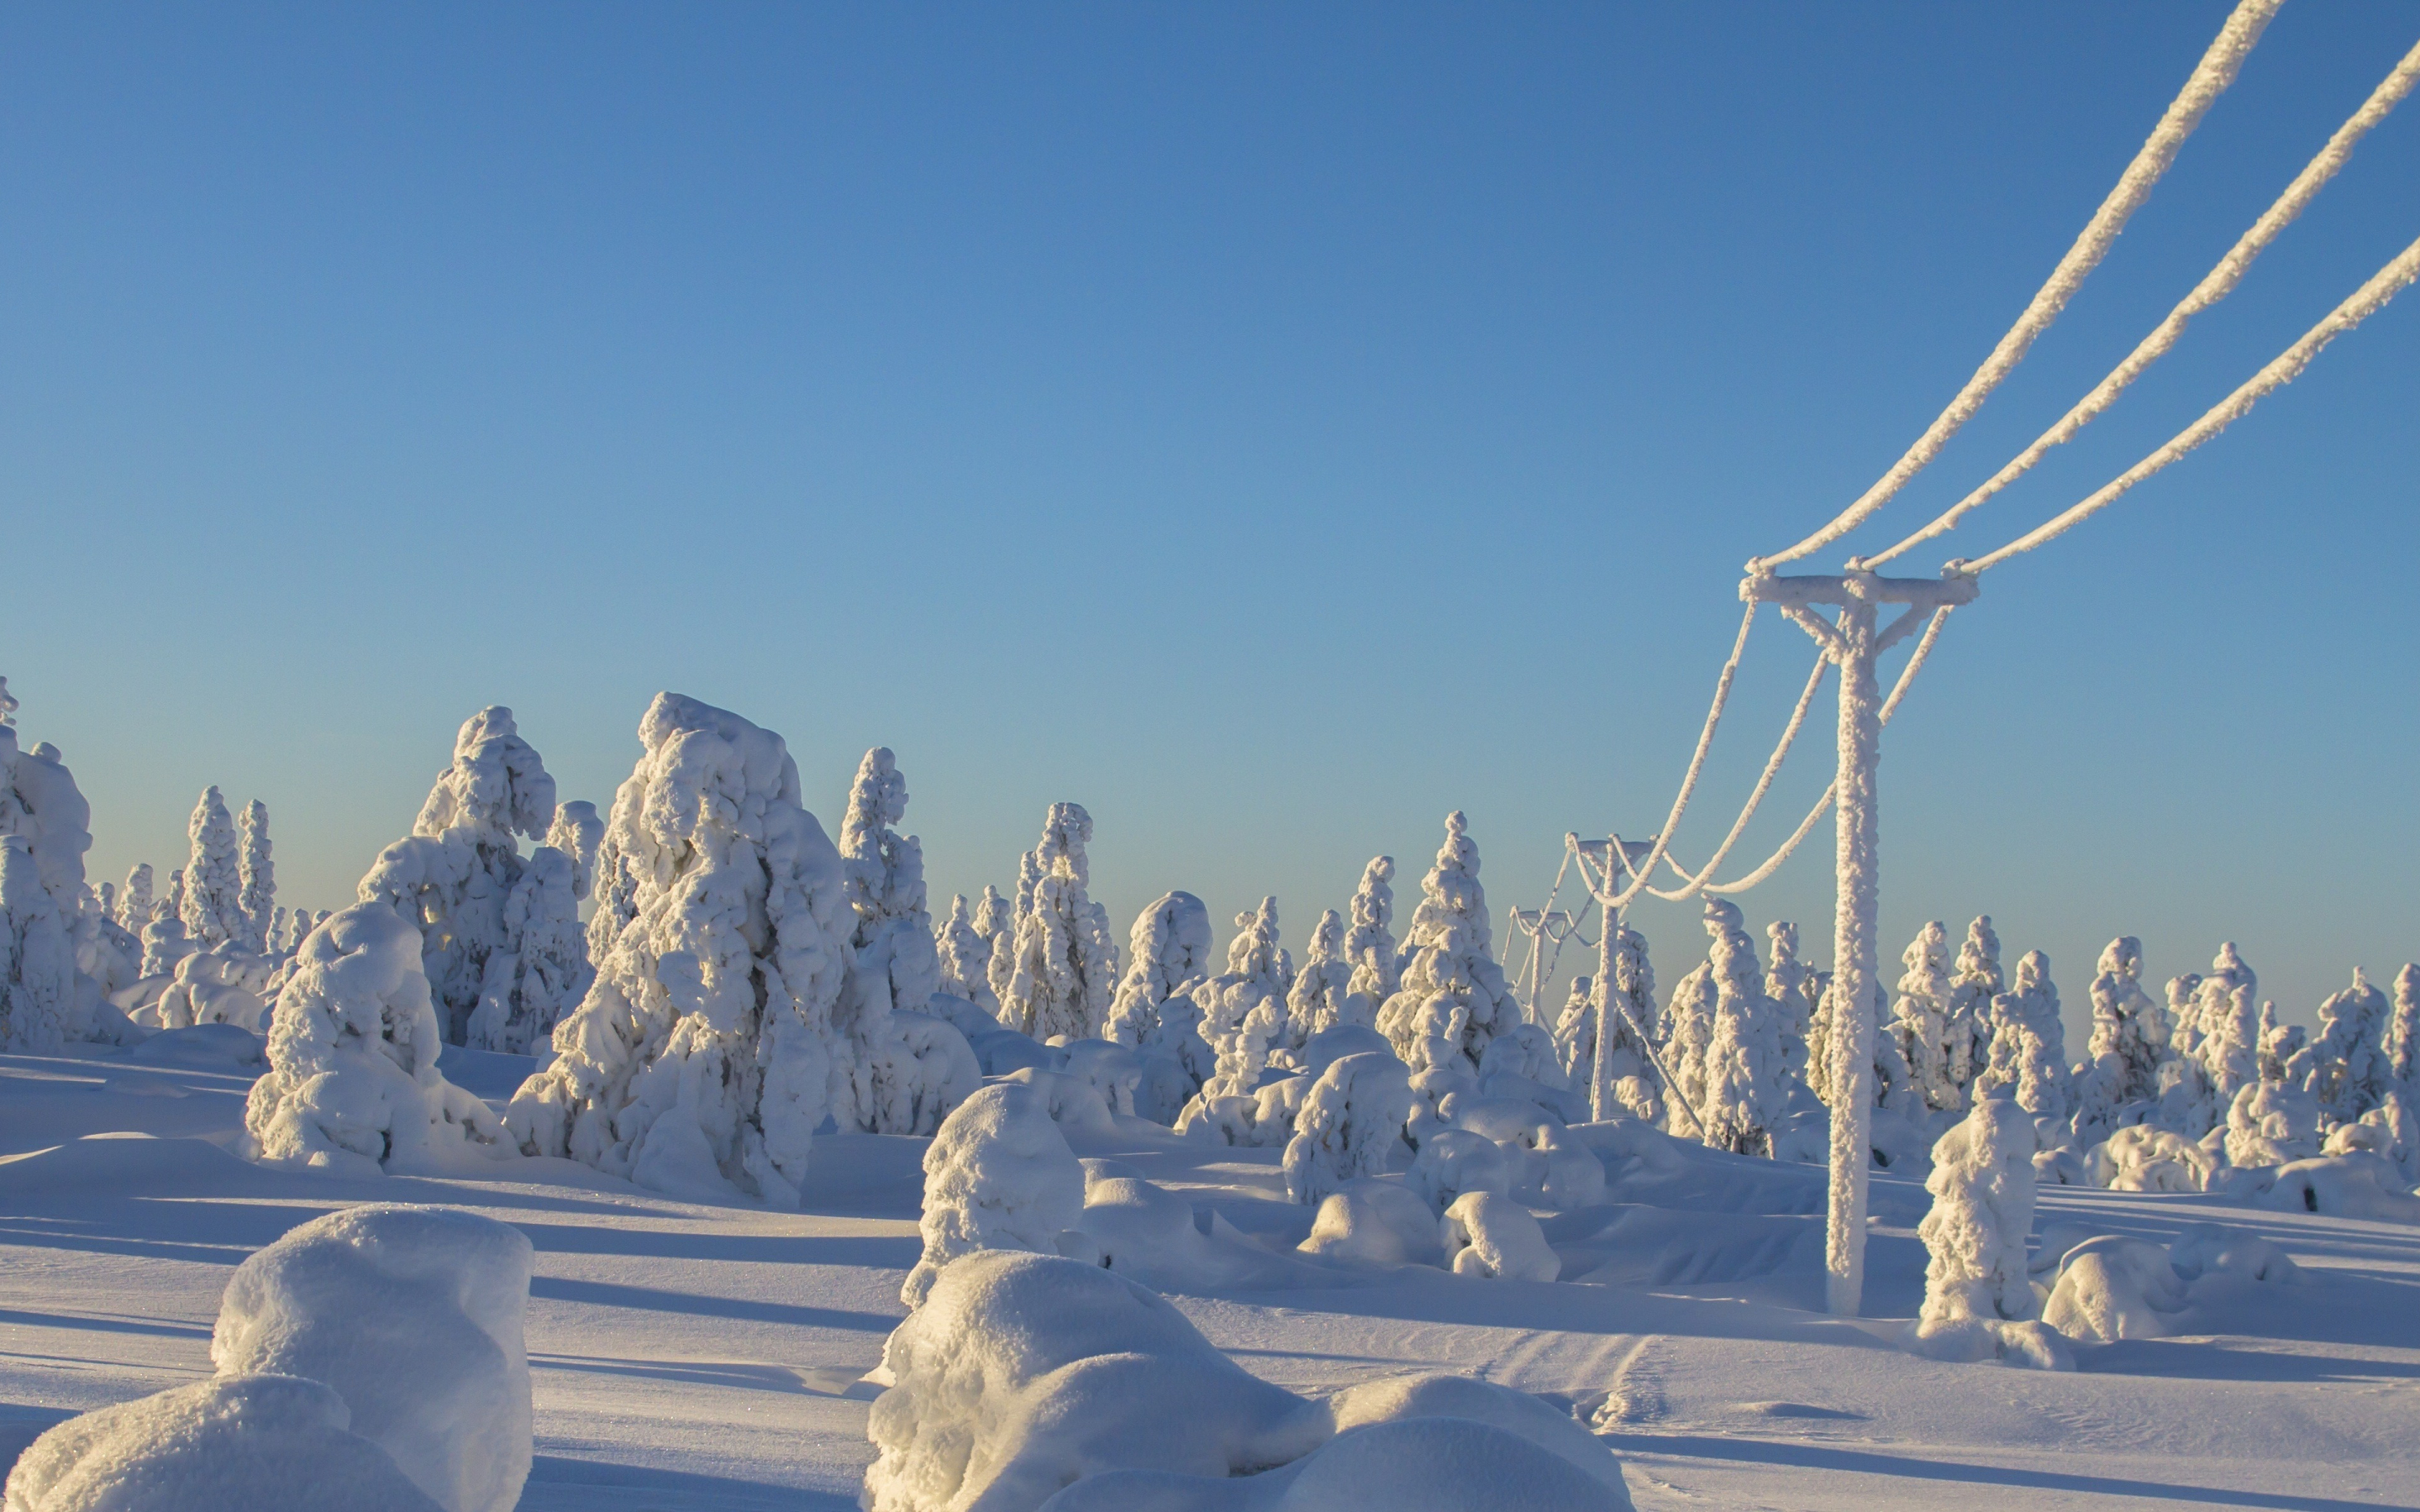 Winter, clean sky, trees, island, landscape, electric towers, snowfall, 2880x1800 wallpaper